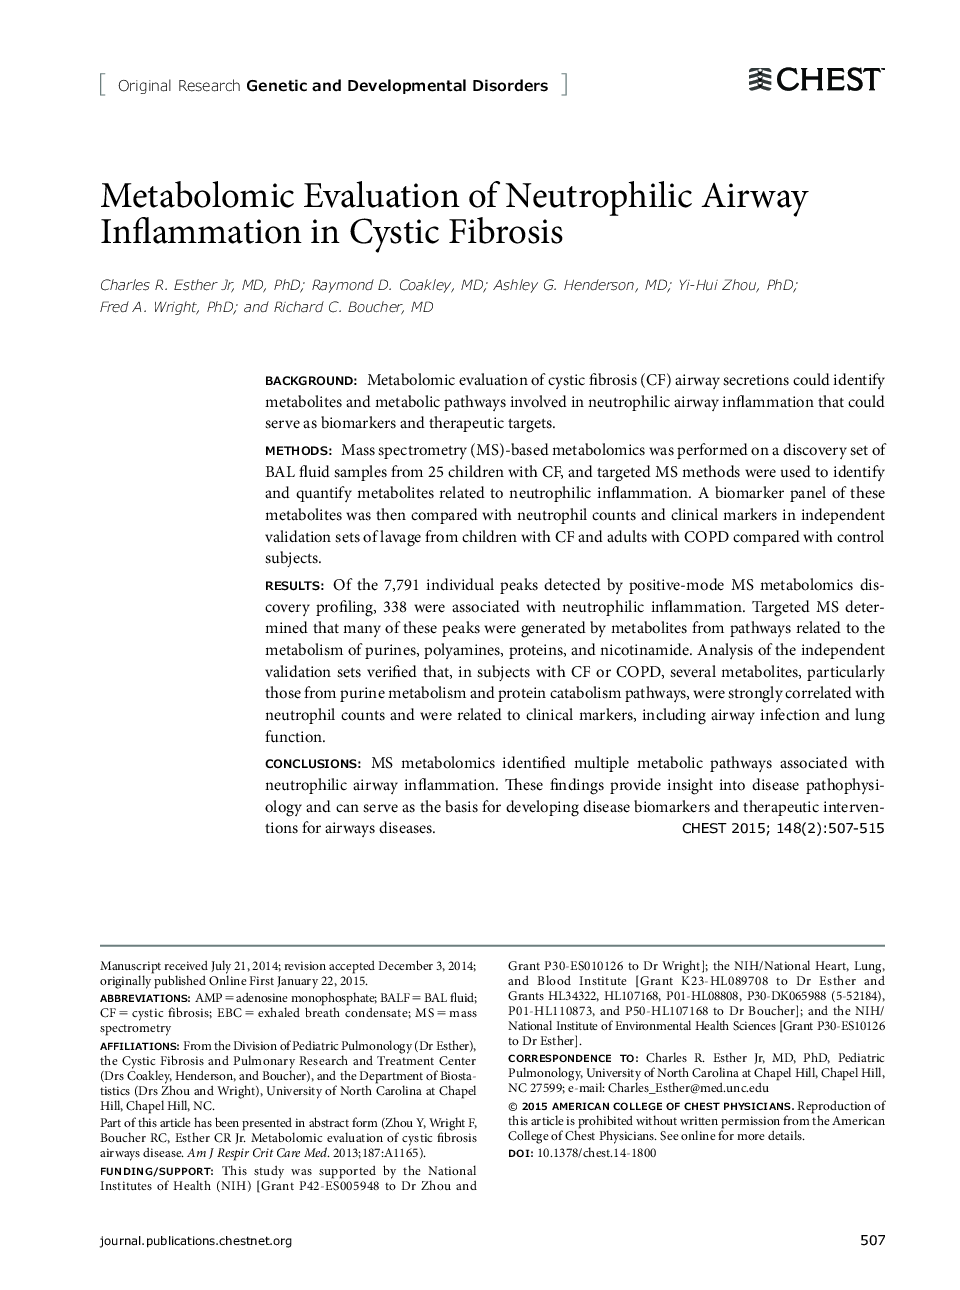 Metabolomic Evaluation of Neutrophilic Airway Inflammation in Cystic Fibrosis